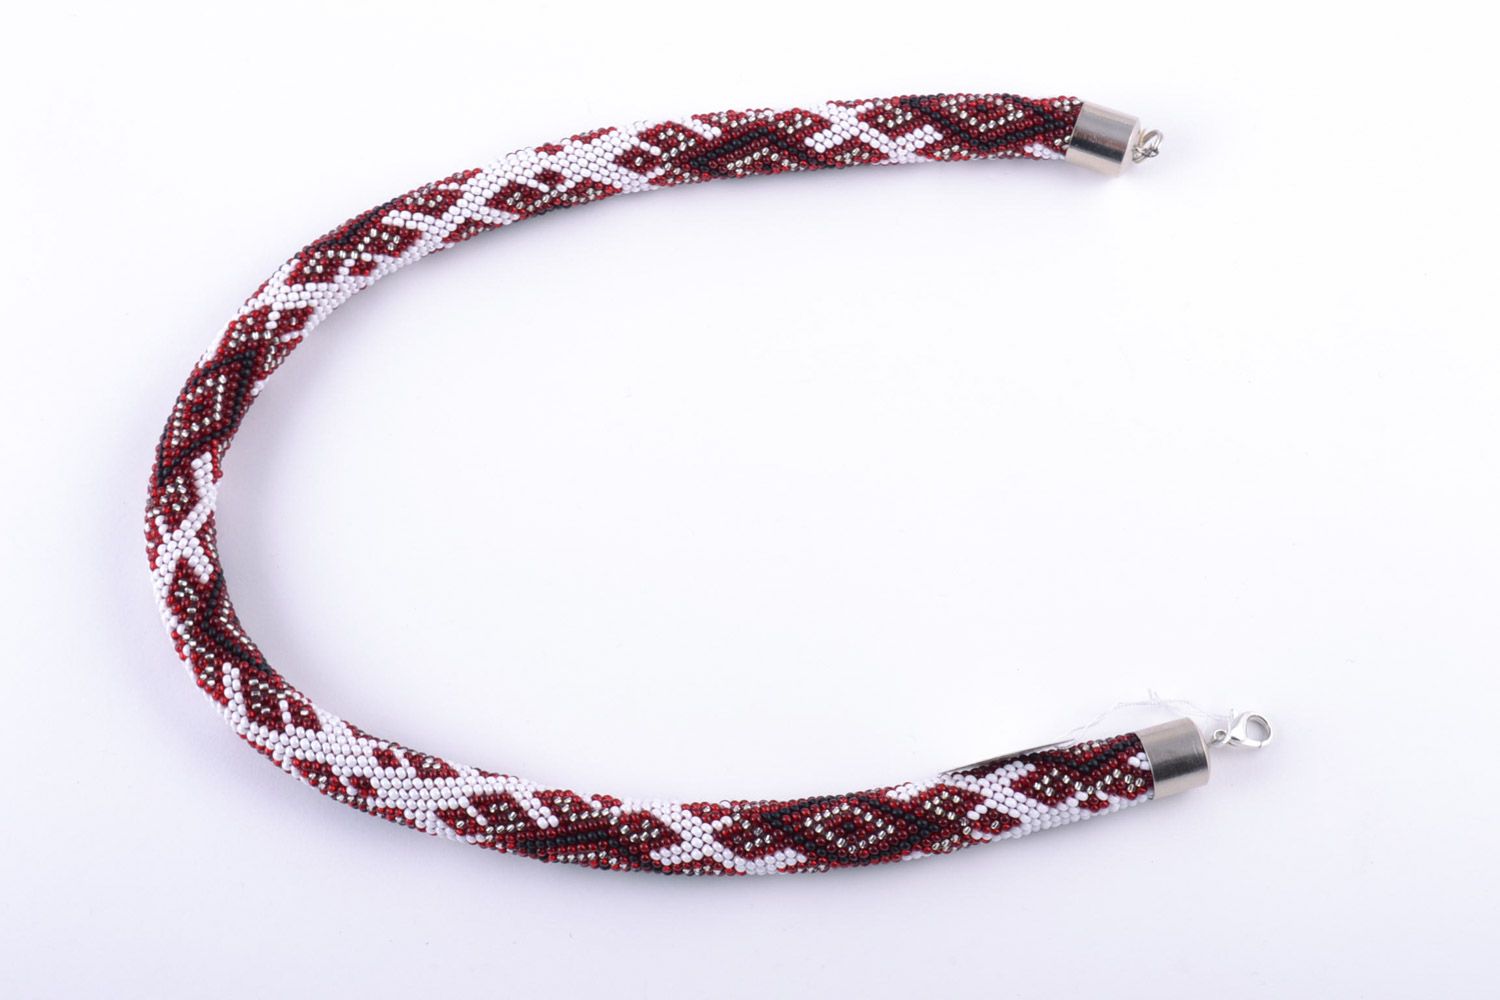 Handmade white beaded cord necklace with red patterns in ethnic style photo 4